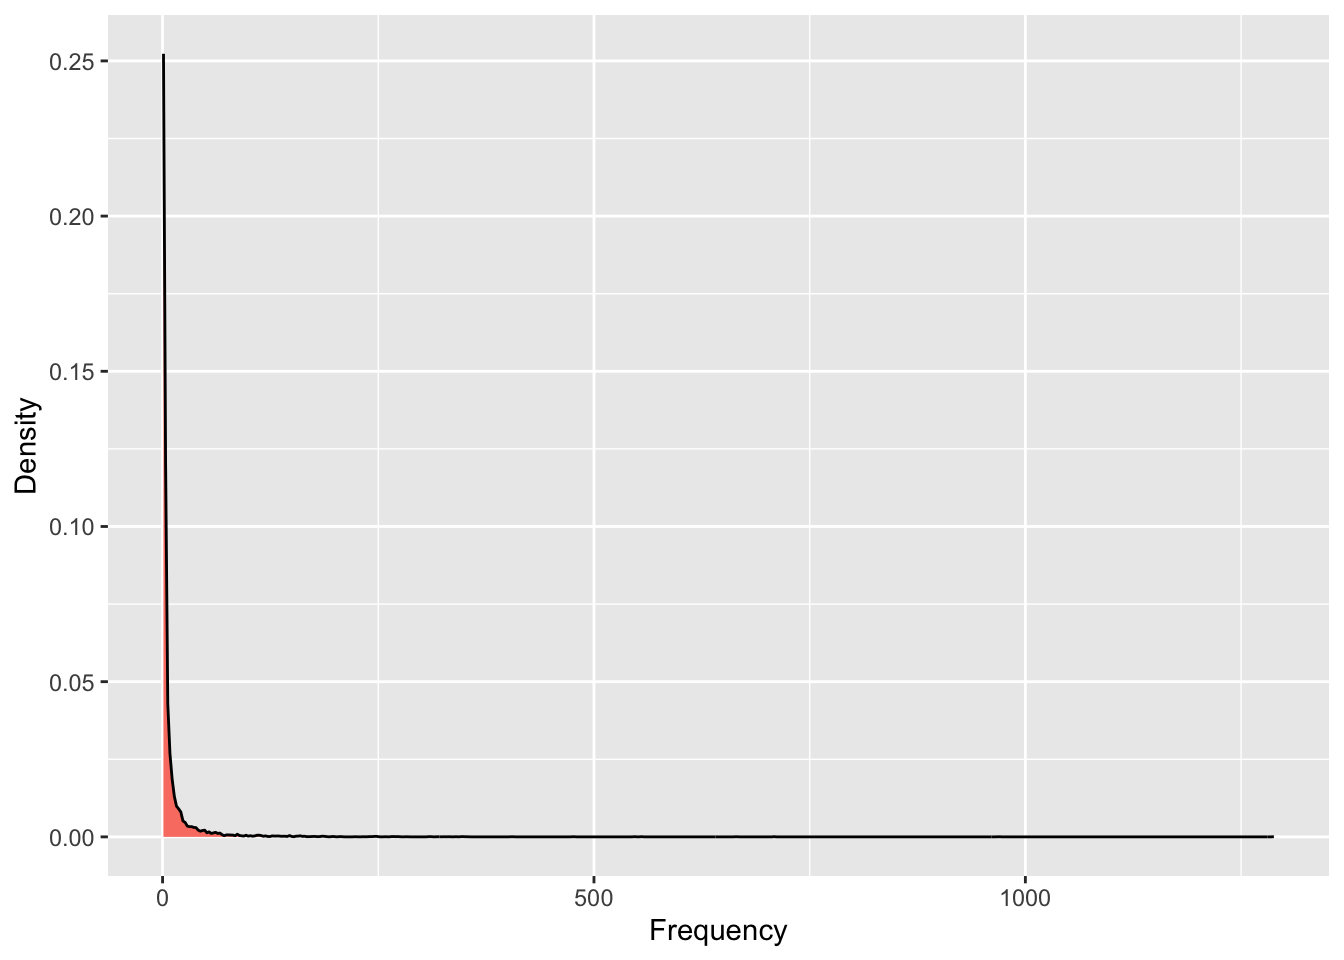 Probability density plot of word frequency